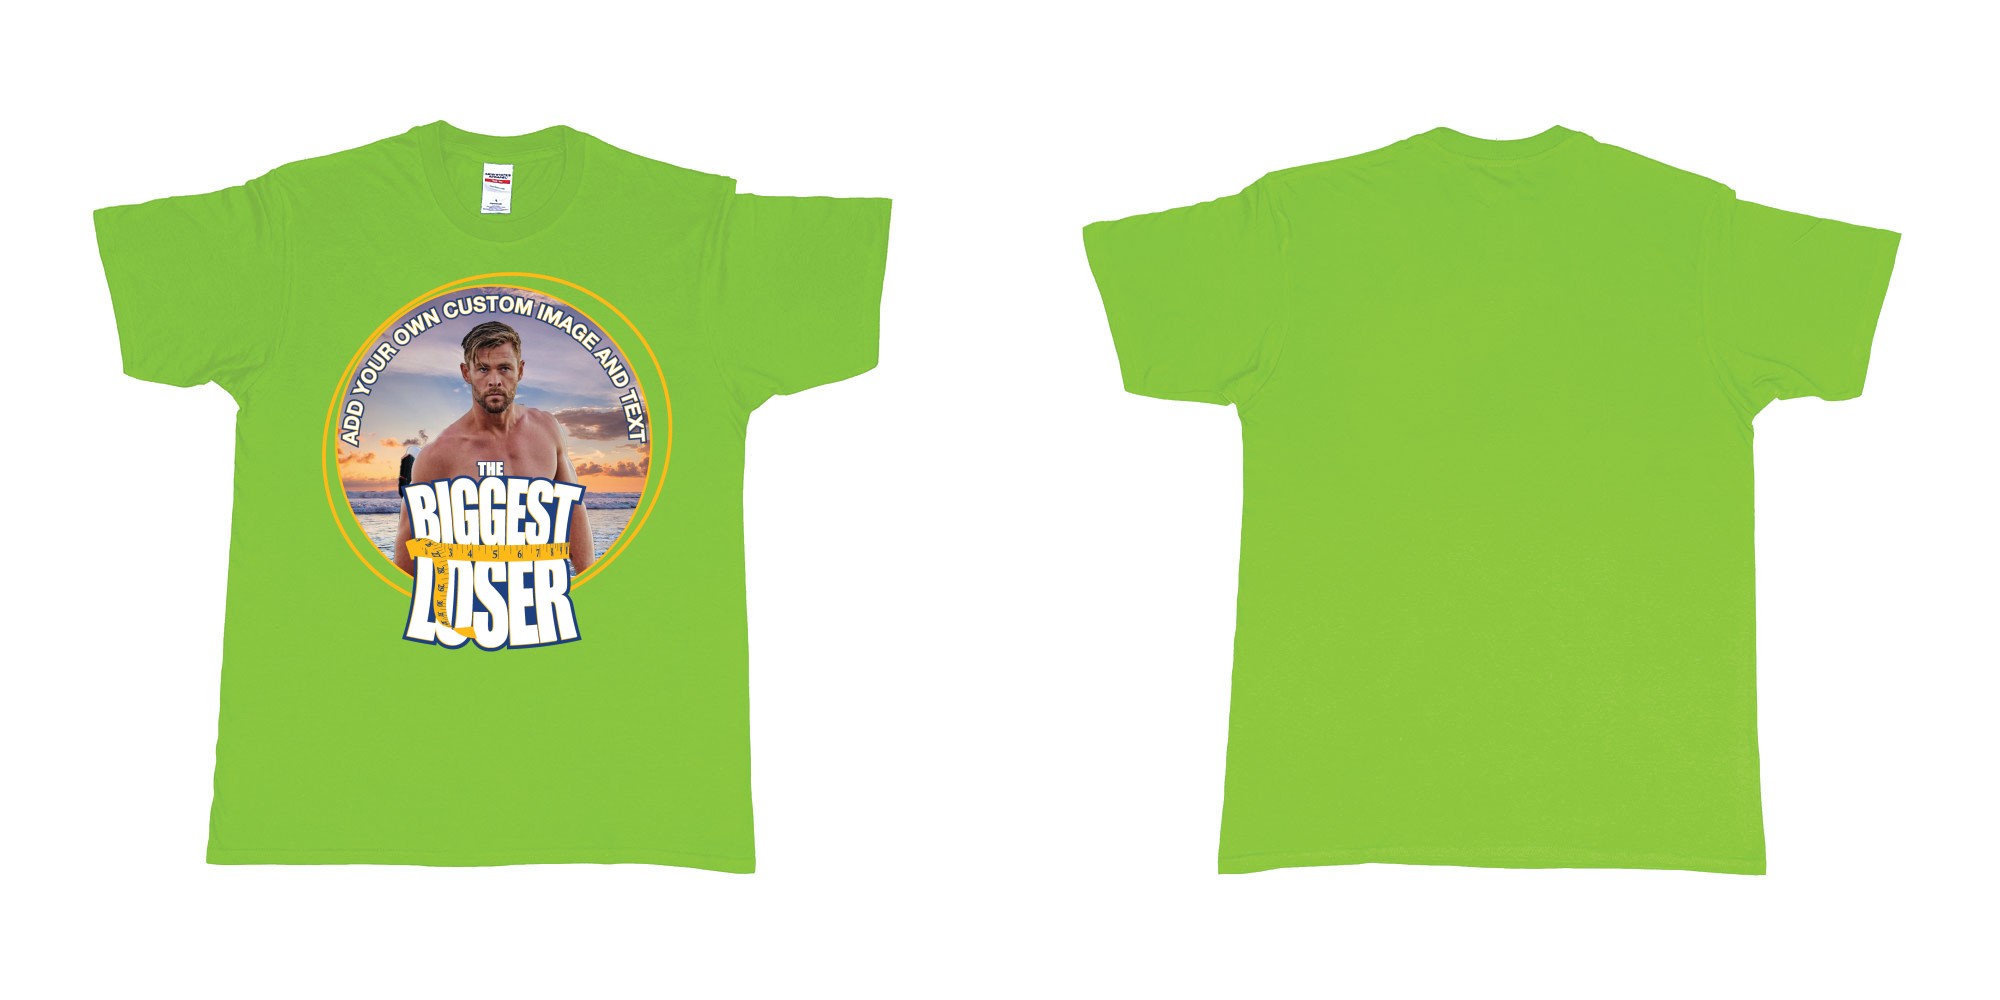 Custom tshirt design the biggest loser logo custom image funny tshirt design in fabric color lime choice your own text made in Bali by The Pirate Way